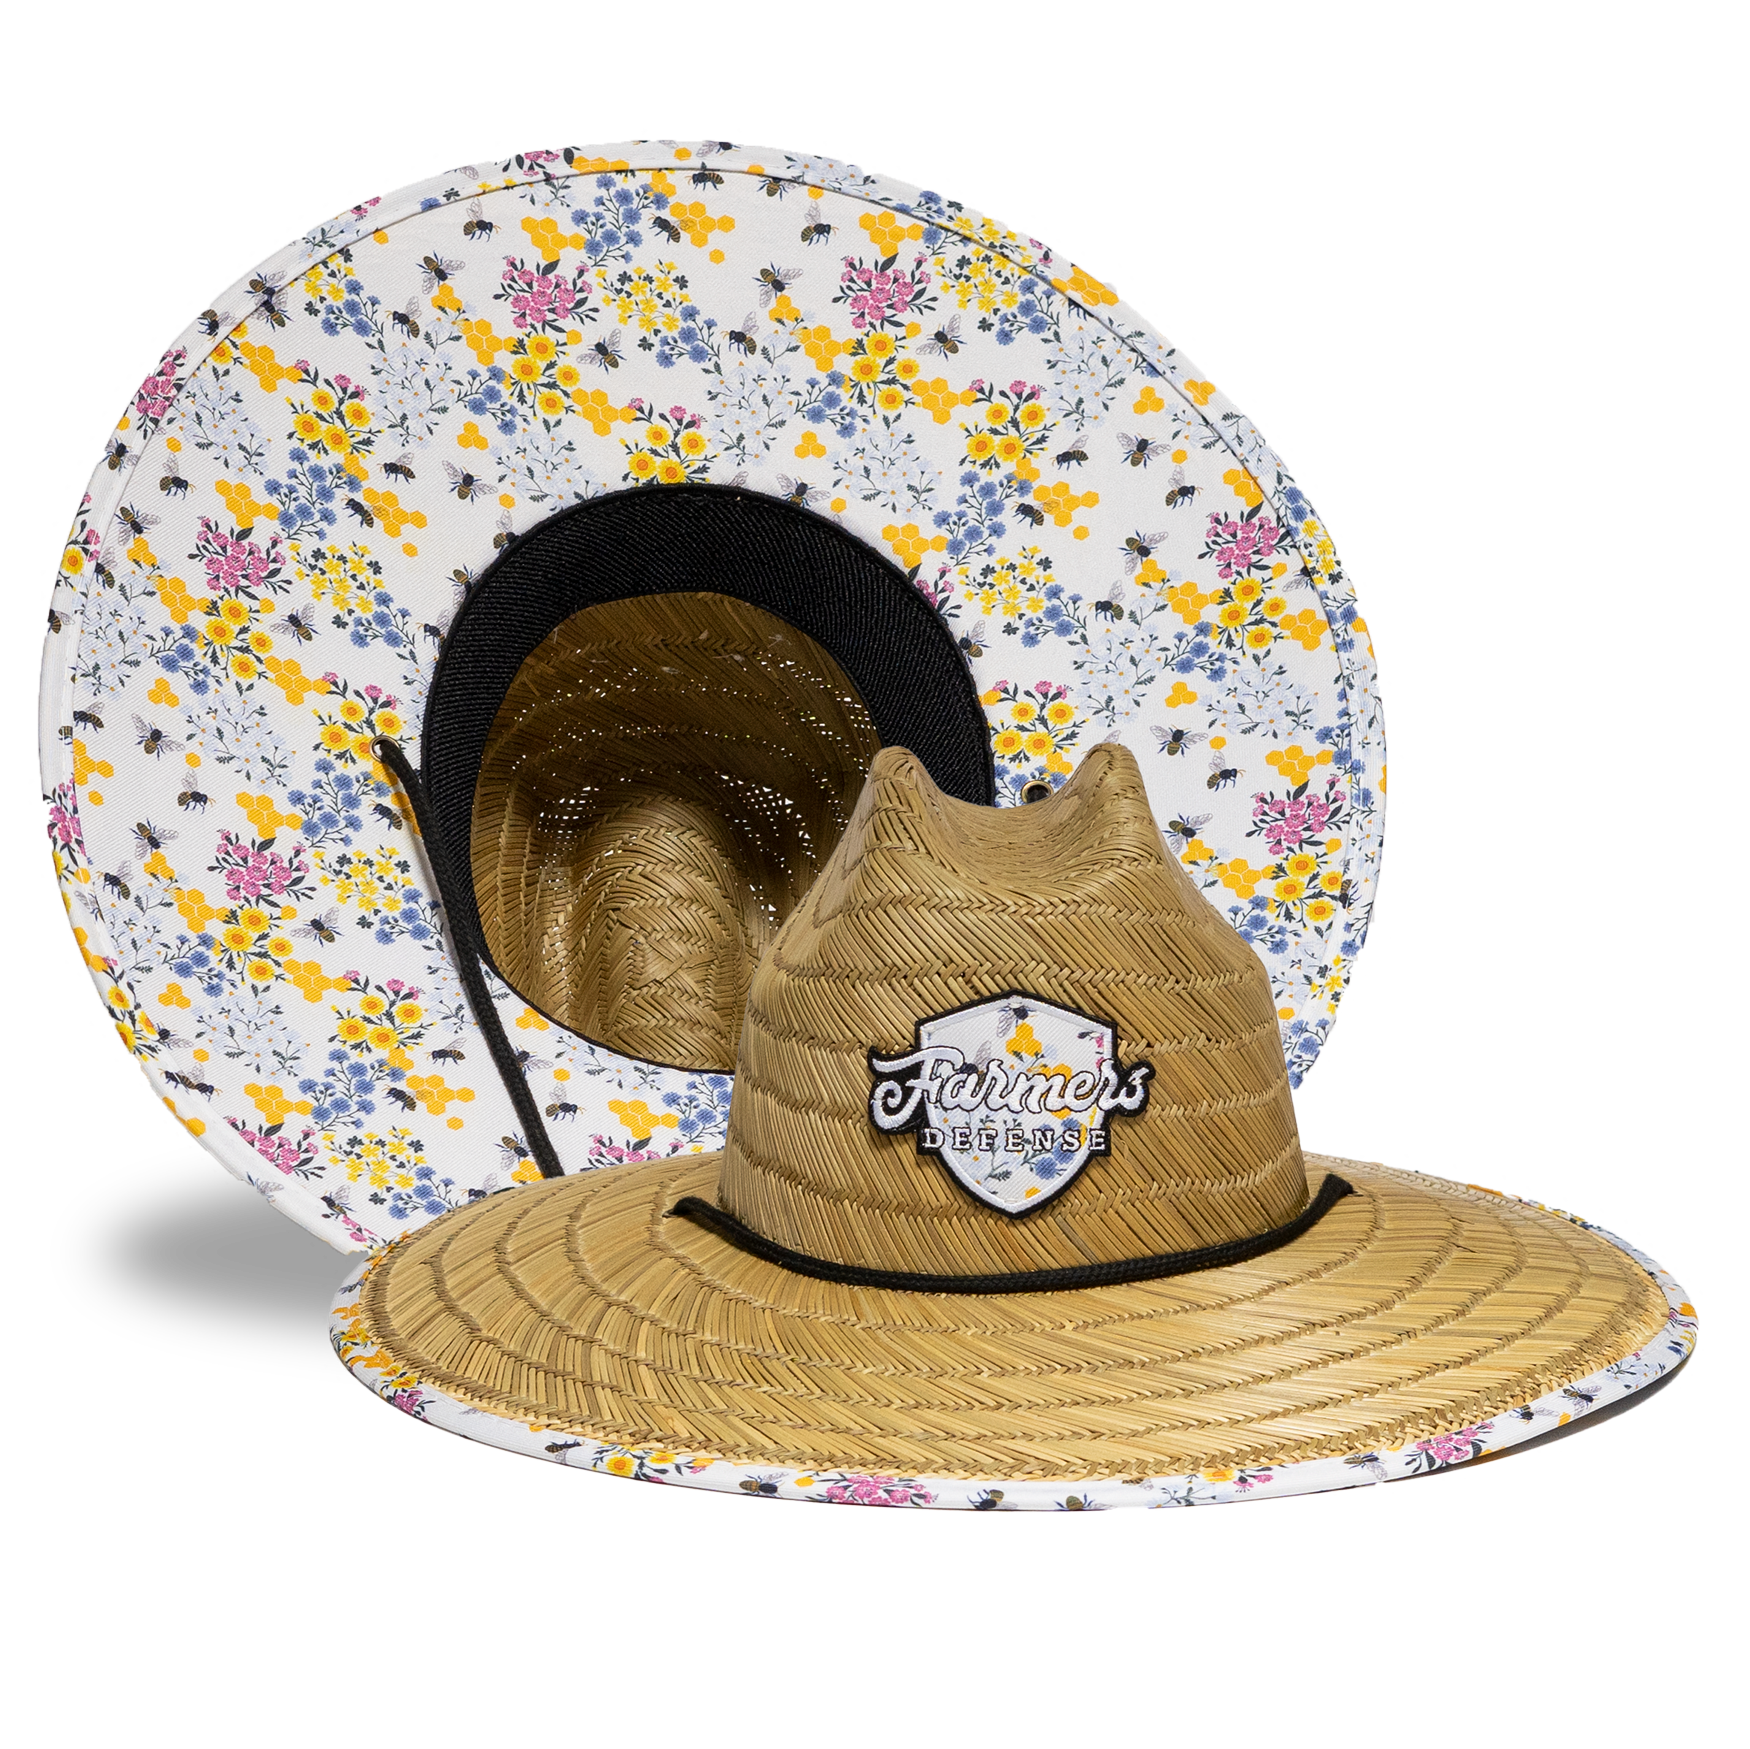 Farmers Defense Straw Hat - Save the Bee's Cream